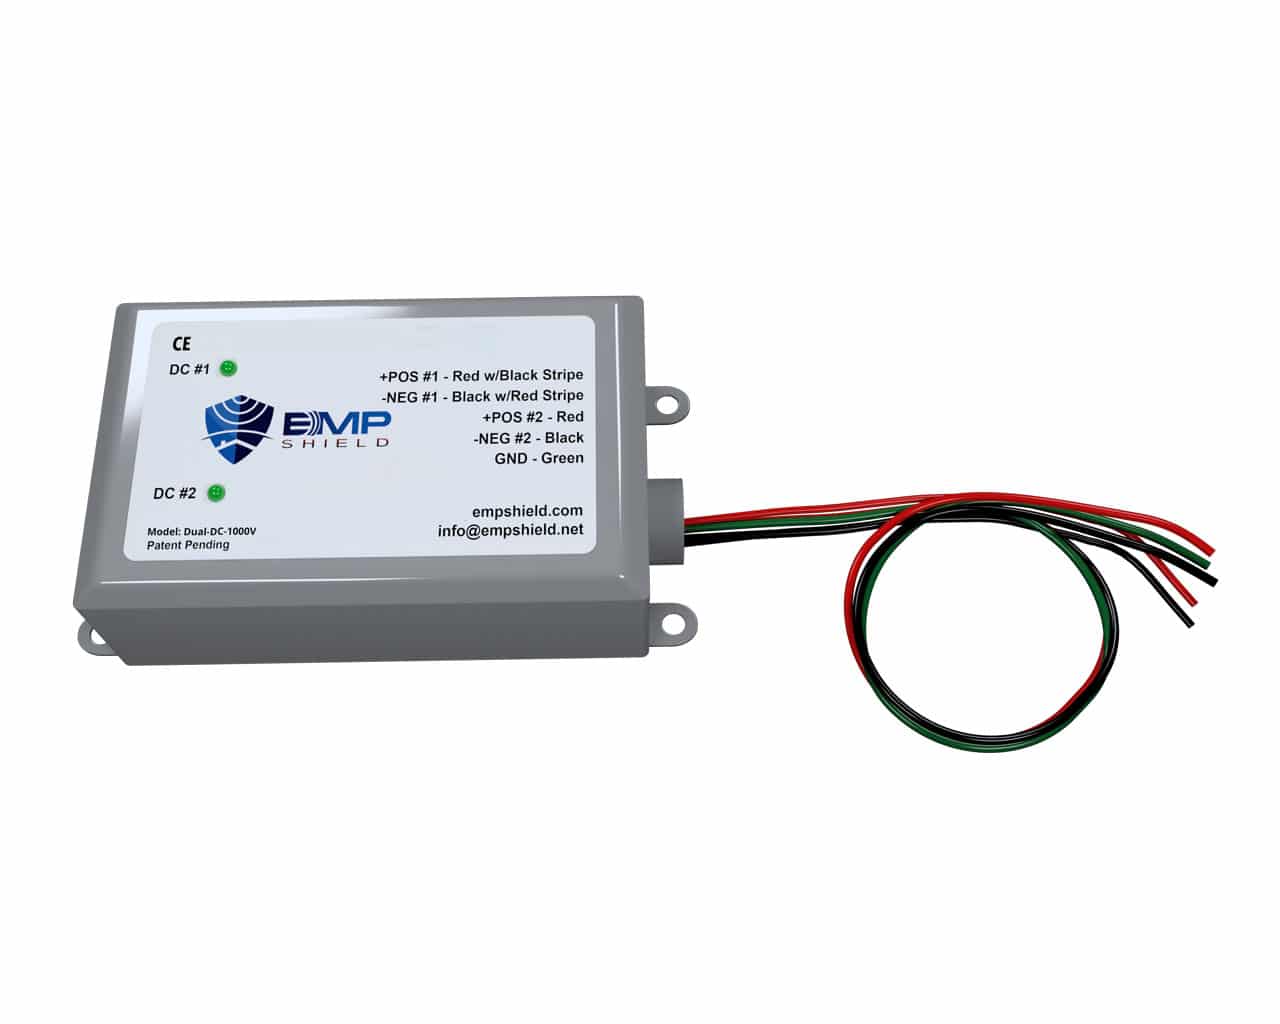 The evv power supply is connected to a white background and is compatible with EMP Shield Solar/Wind DC Dual 1000 Volt Systems (Dual-DC-1000V).